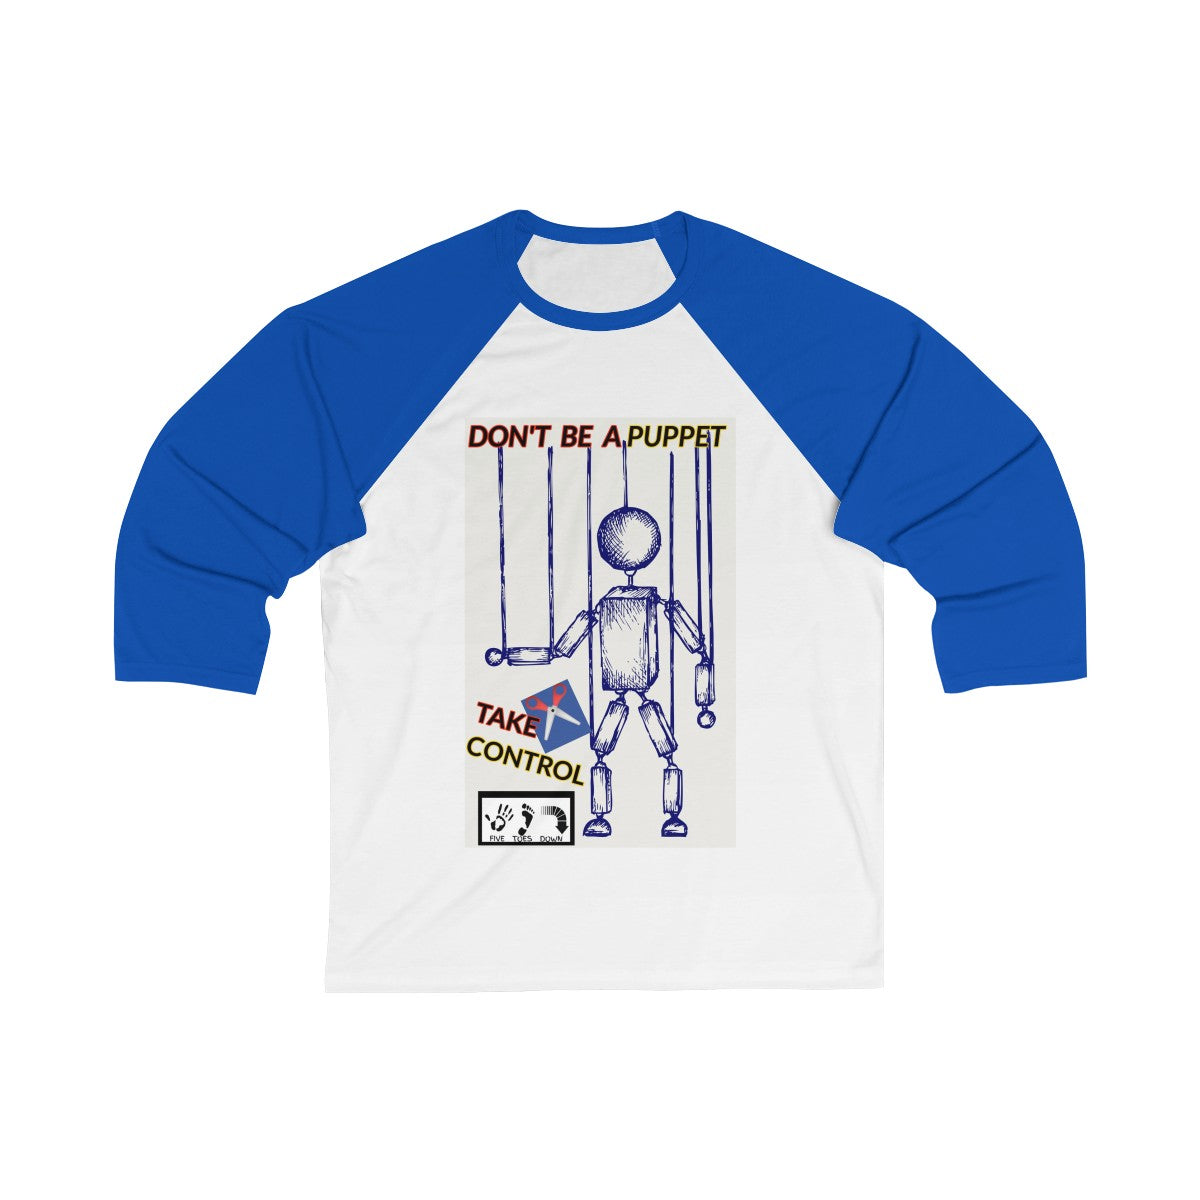 Five Toes Down Puppet Unisex 3/4 Sleeve Baseball Tee